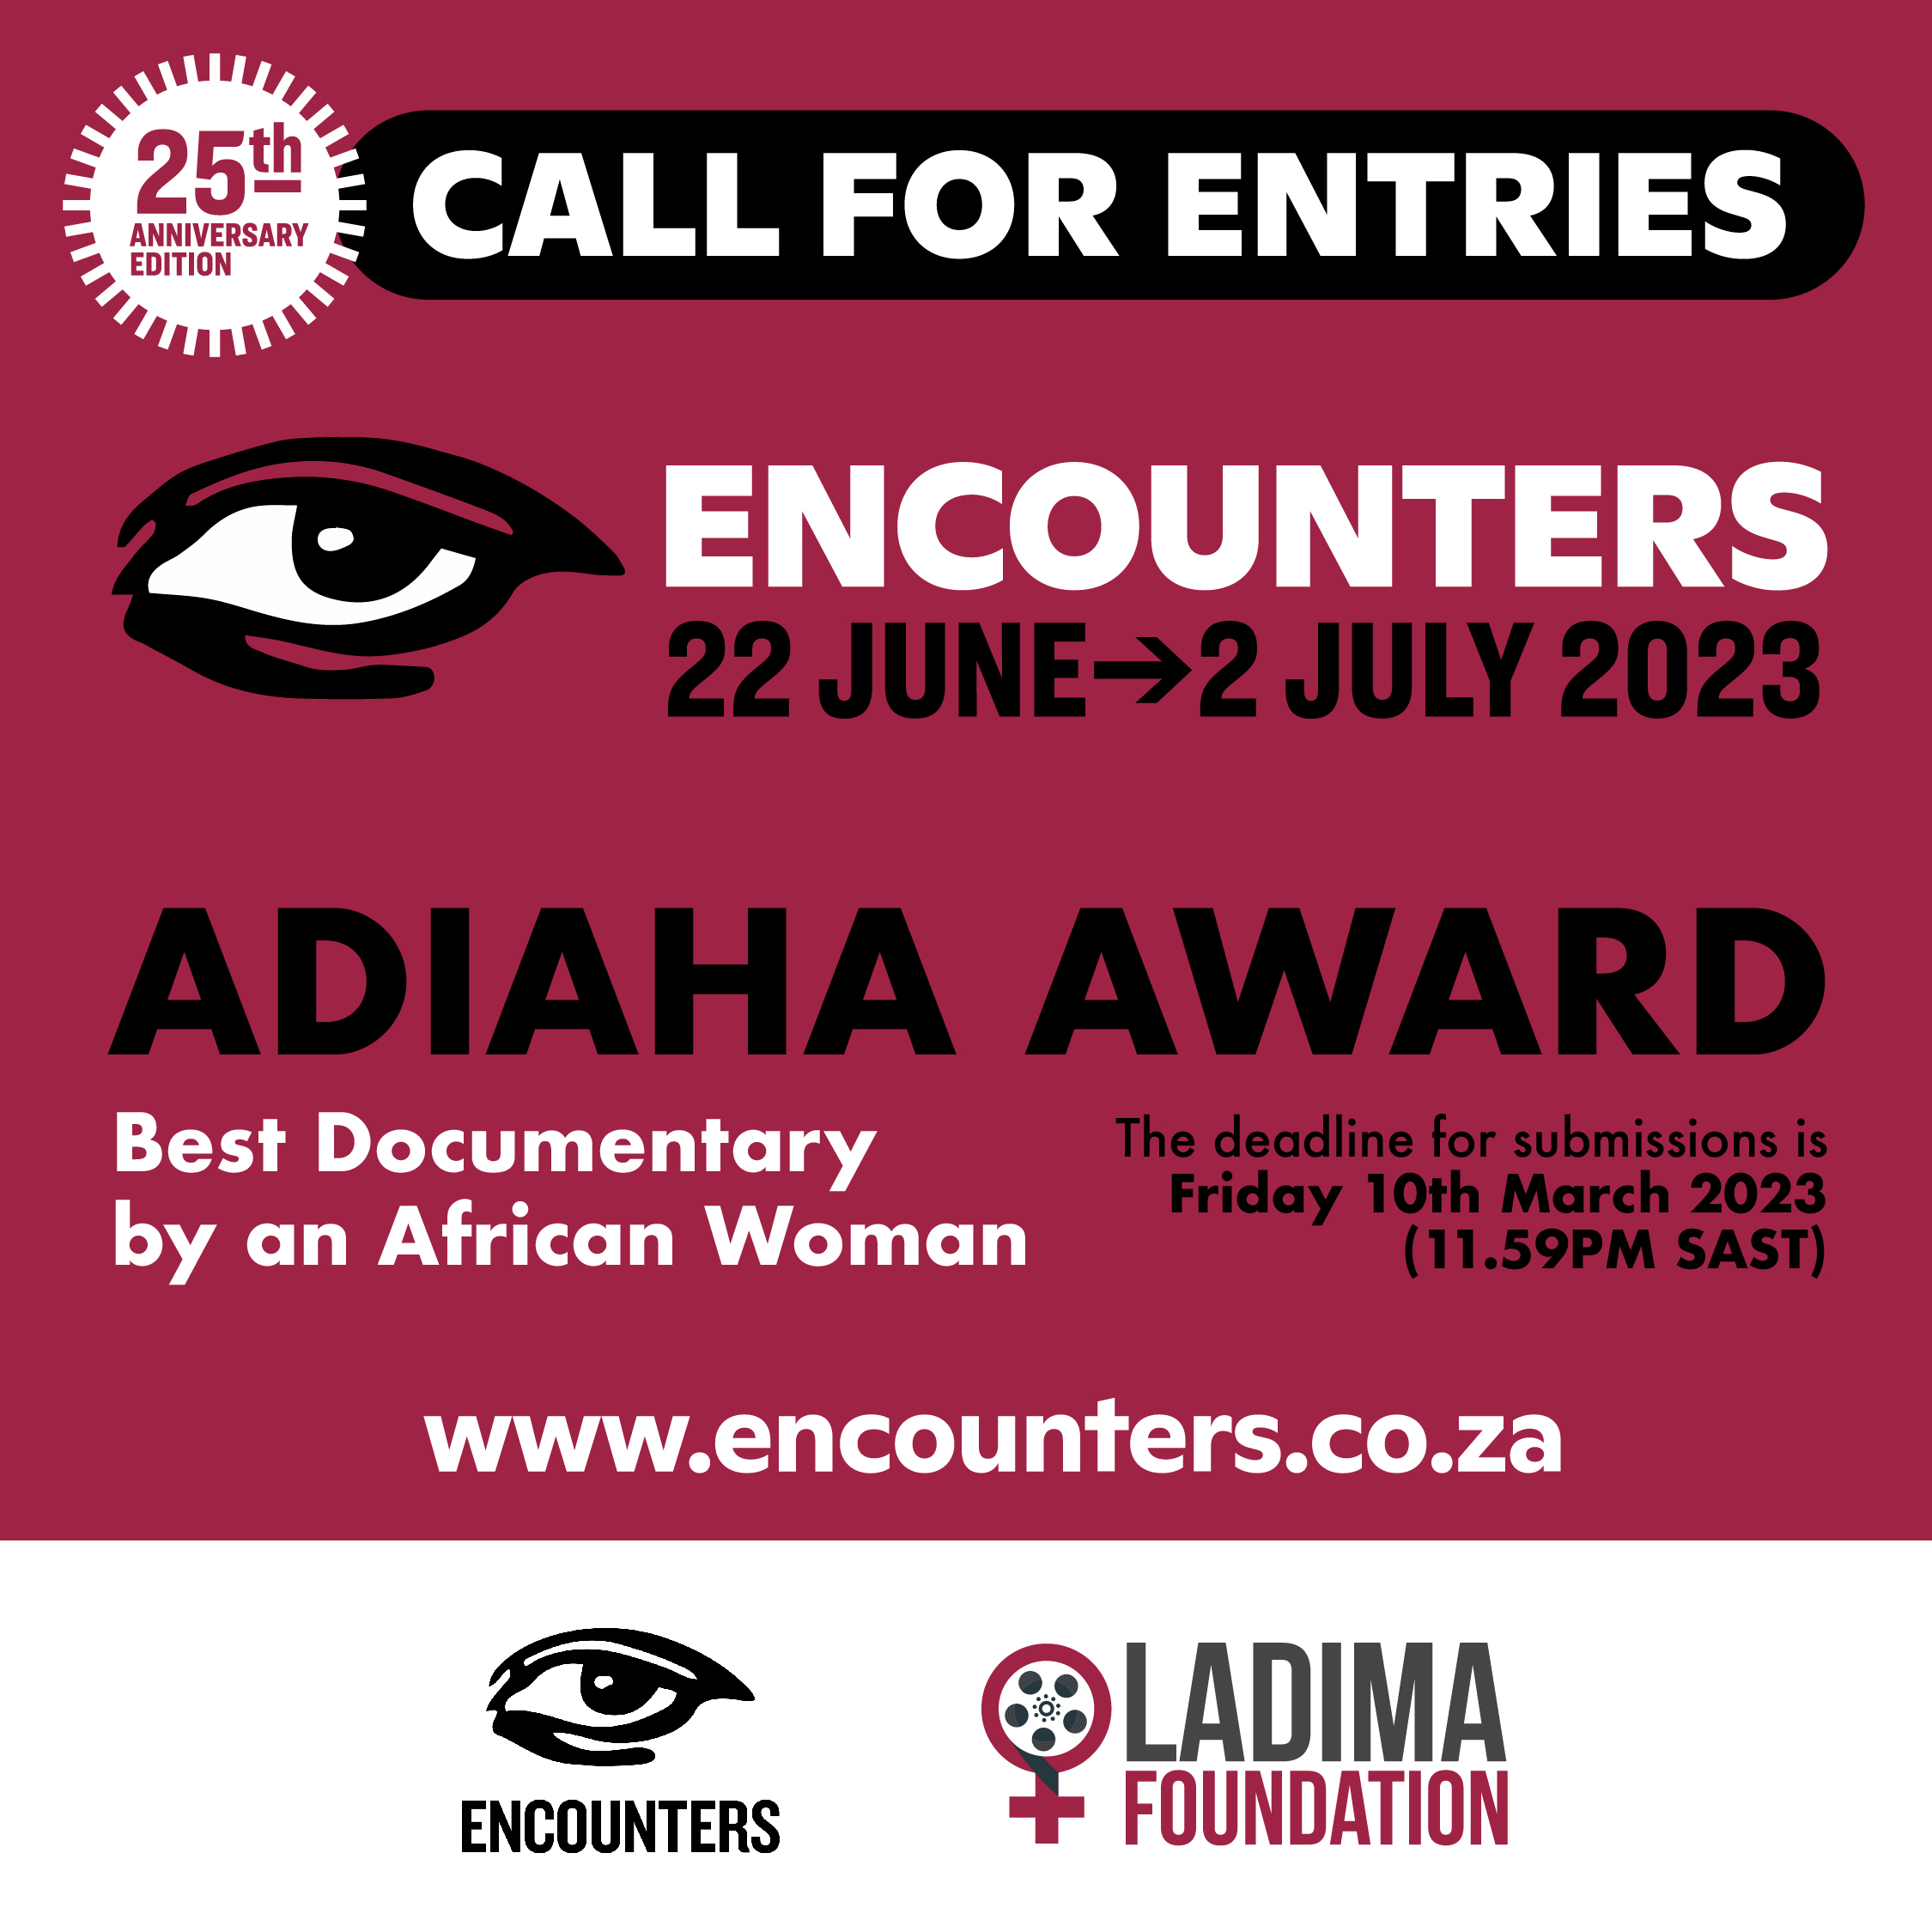 Encounters invites entries for the Adiaha Award for the Best Documentary by an African Woman